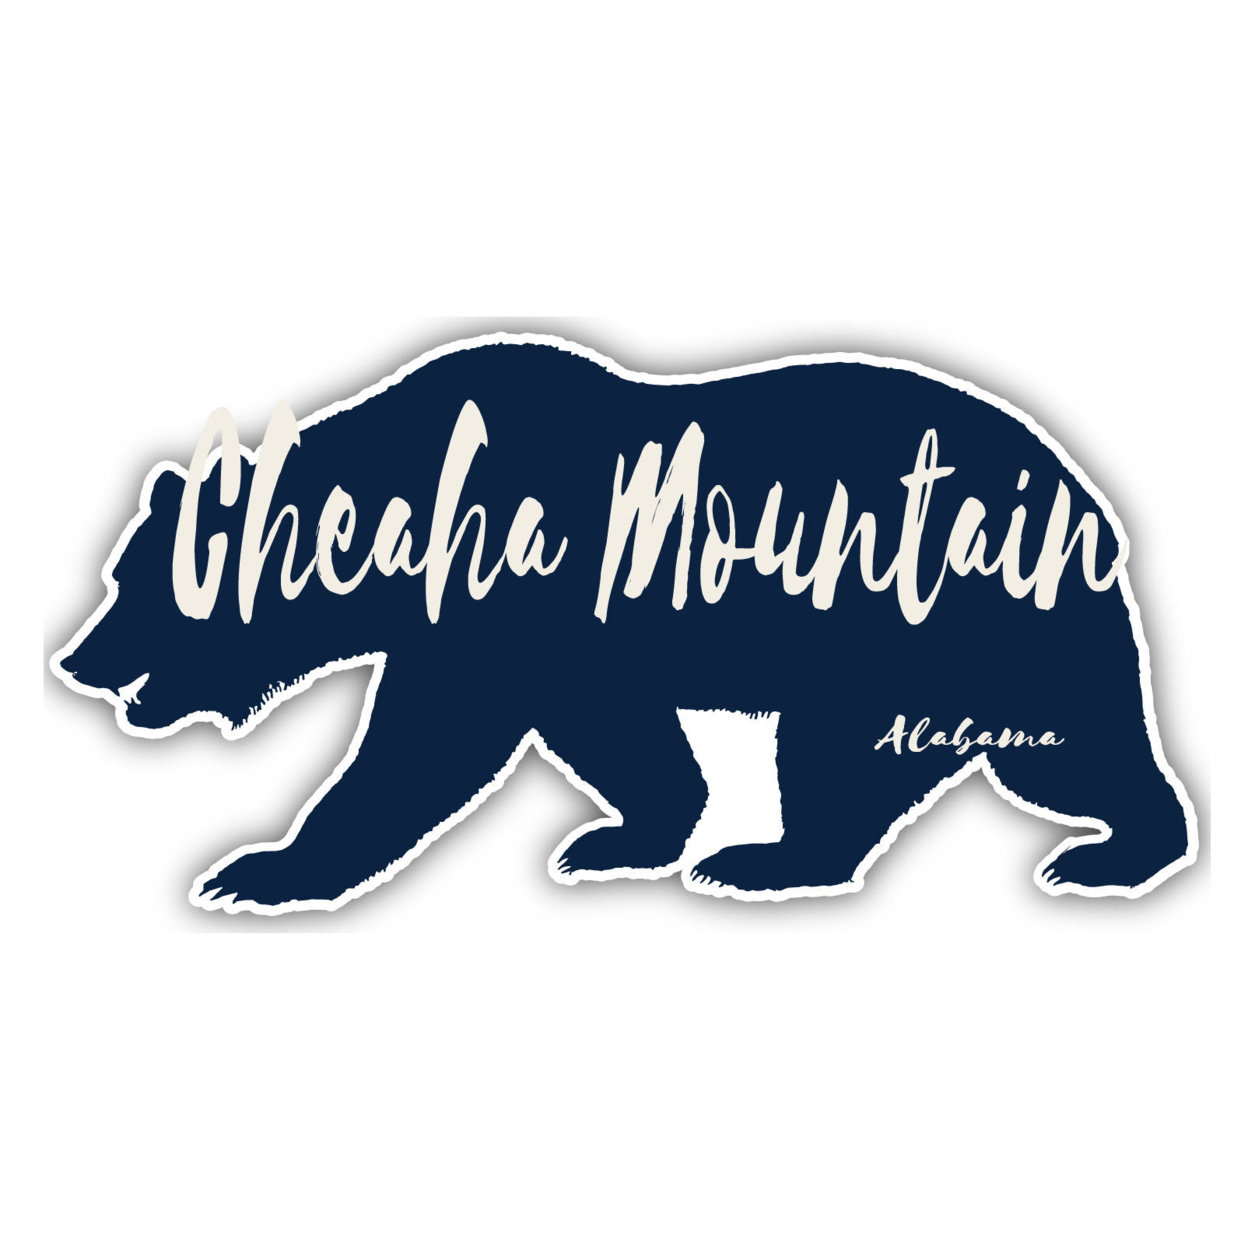 Cheaha Mountain Alabama Souvenir Decorative Stickers (Choose Theme And Size) - 4-Pack, 2-Inch, Bear